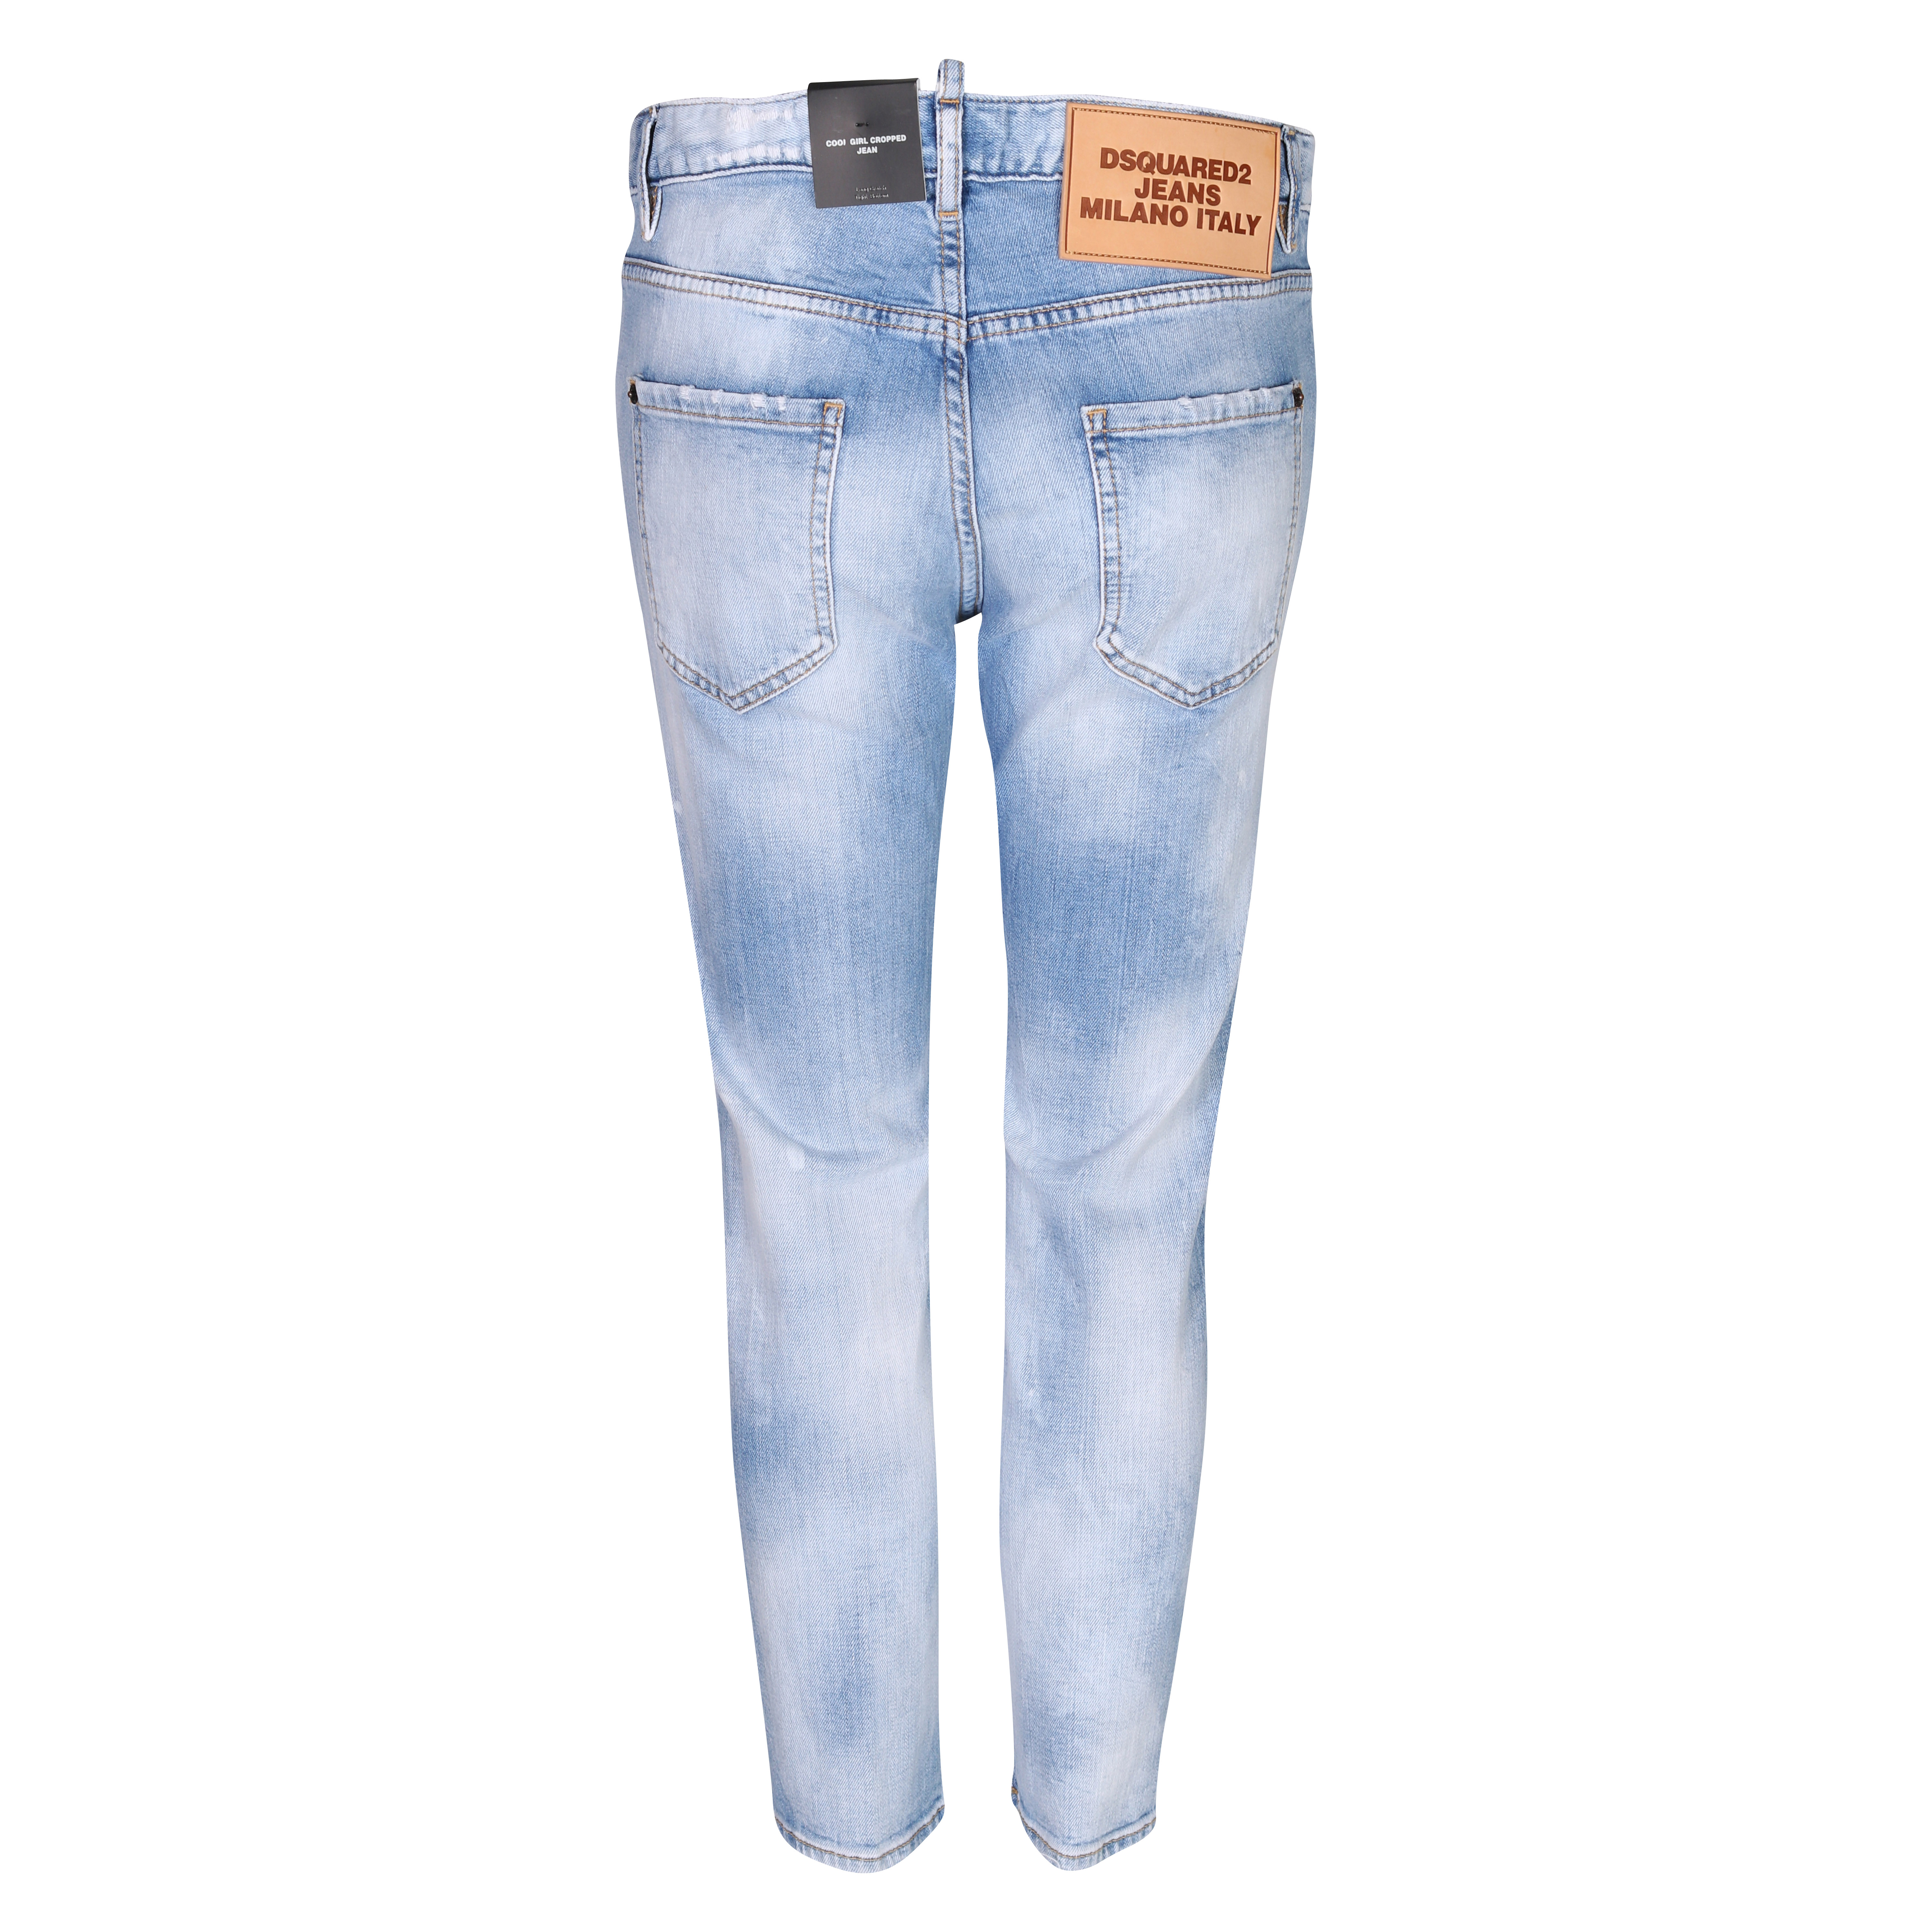 Dsquared Jeans Cool Girl Cropped Jean Light Blue Washed